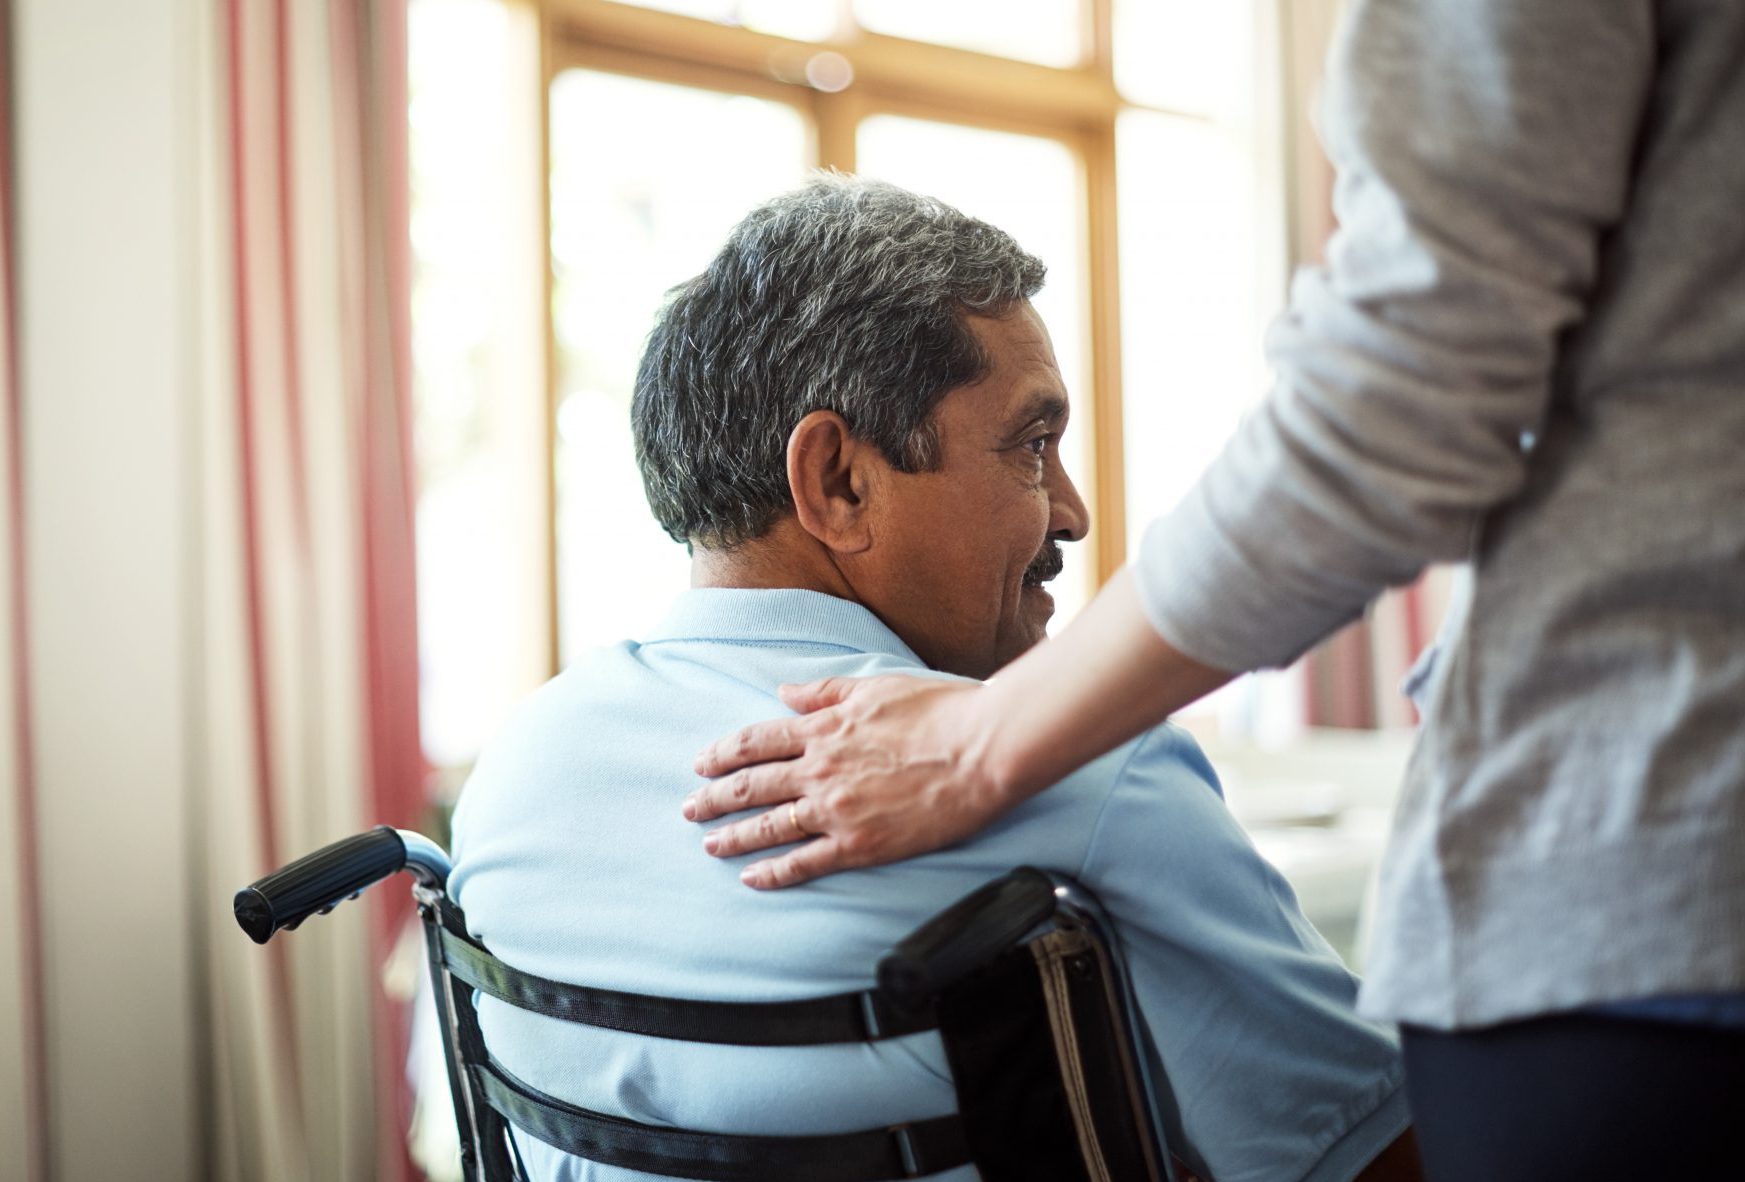 Man in a wheelchair with another person's comforting hand on his shoulder.